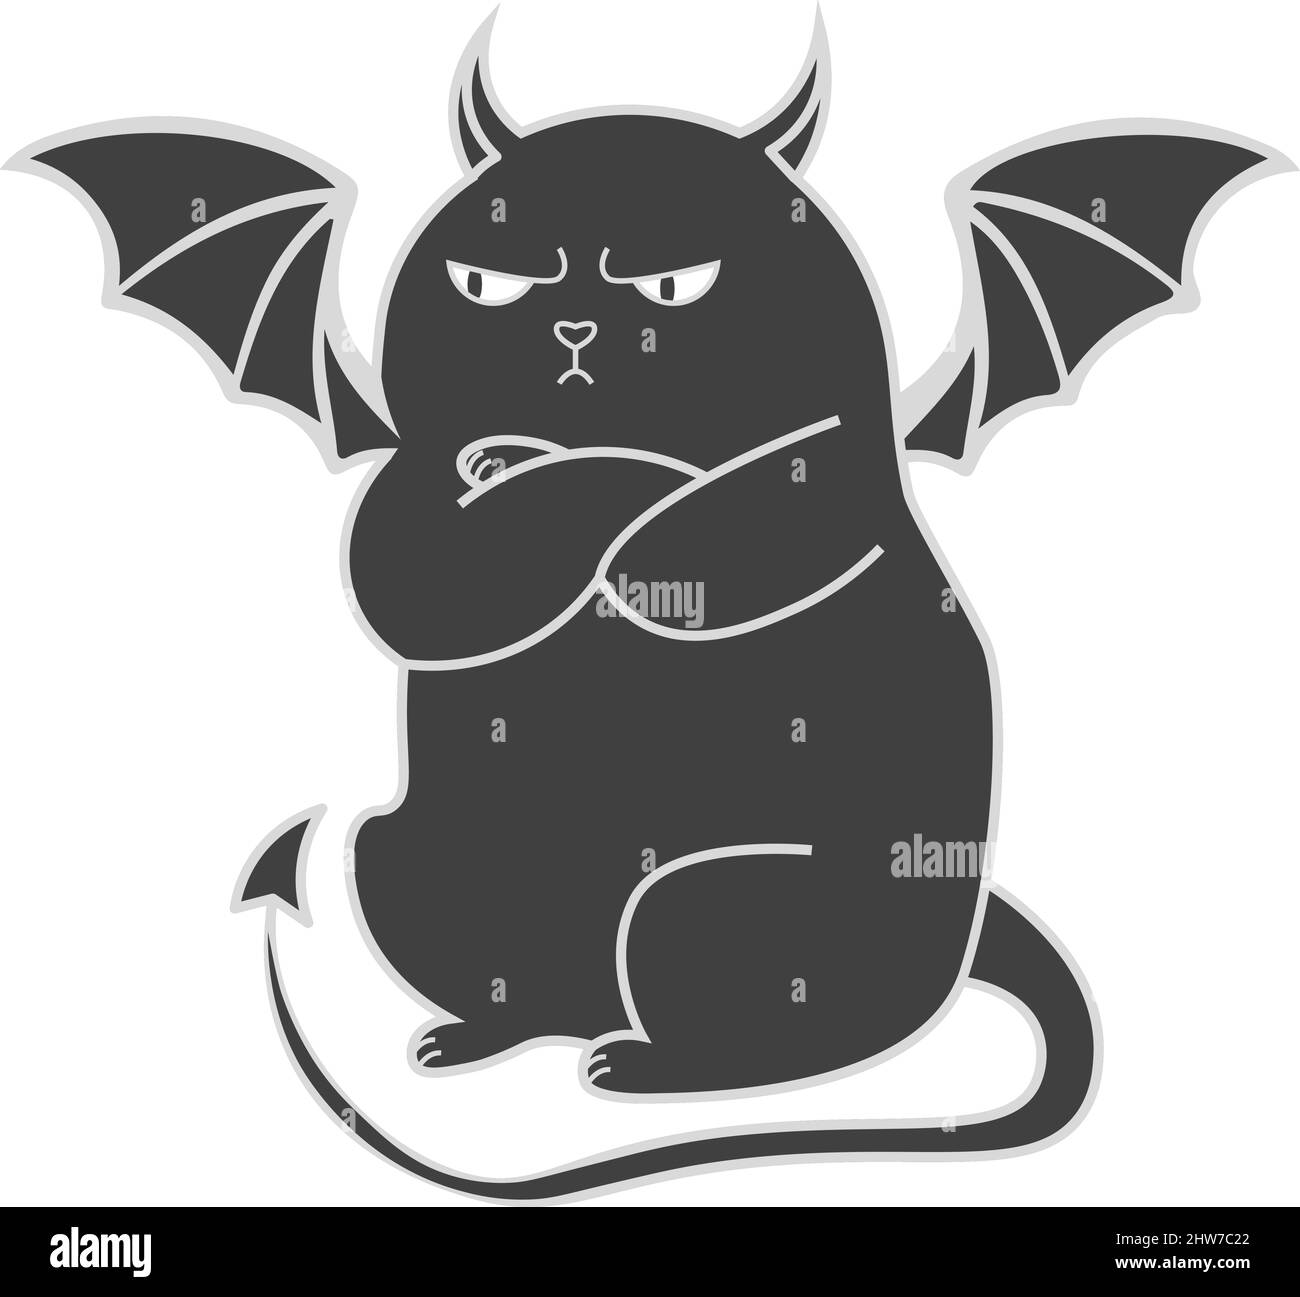 Funny animal character angry cat with devil wings drawing in flat style Stock Vector